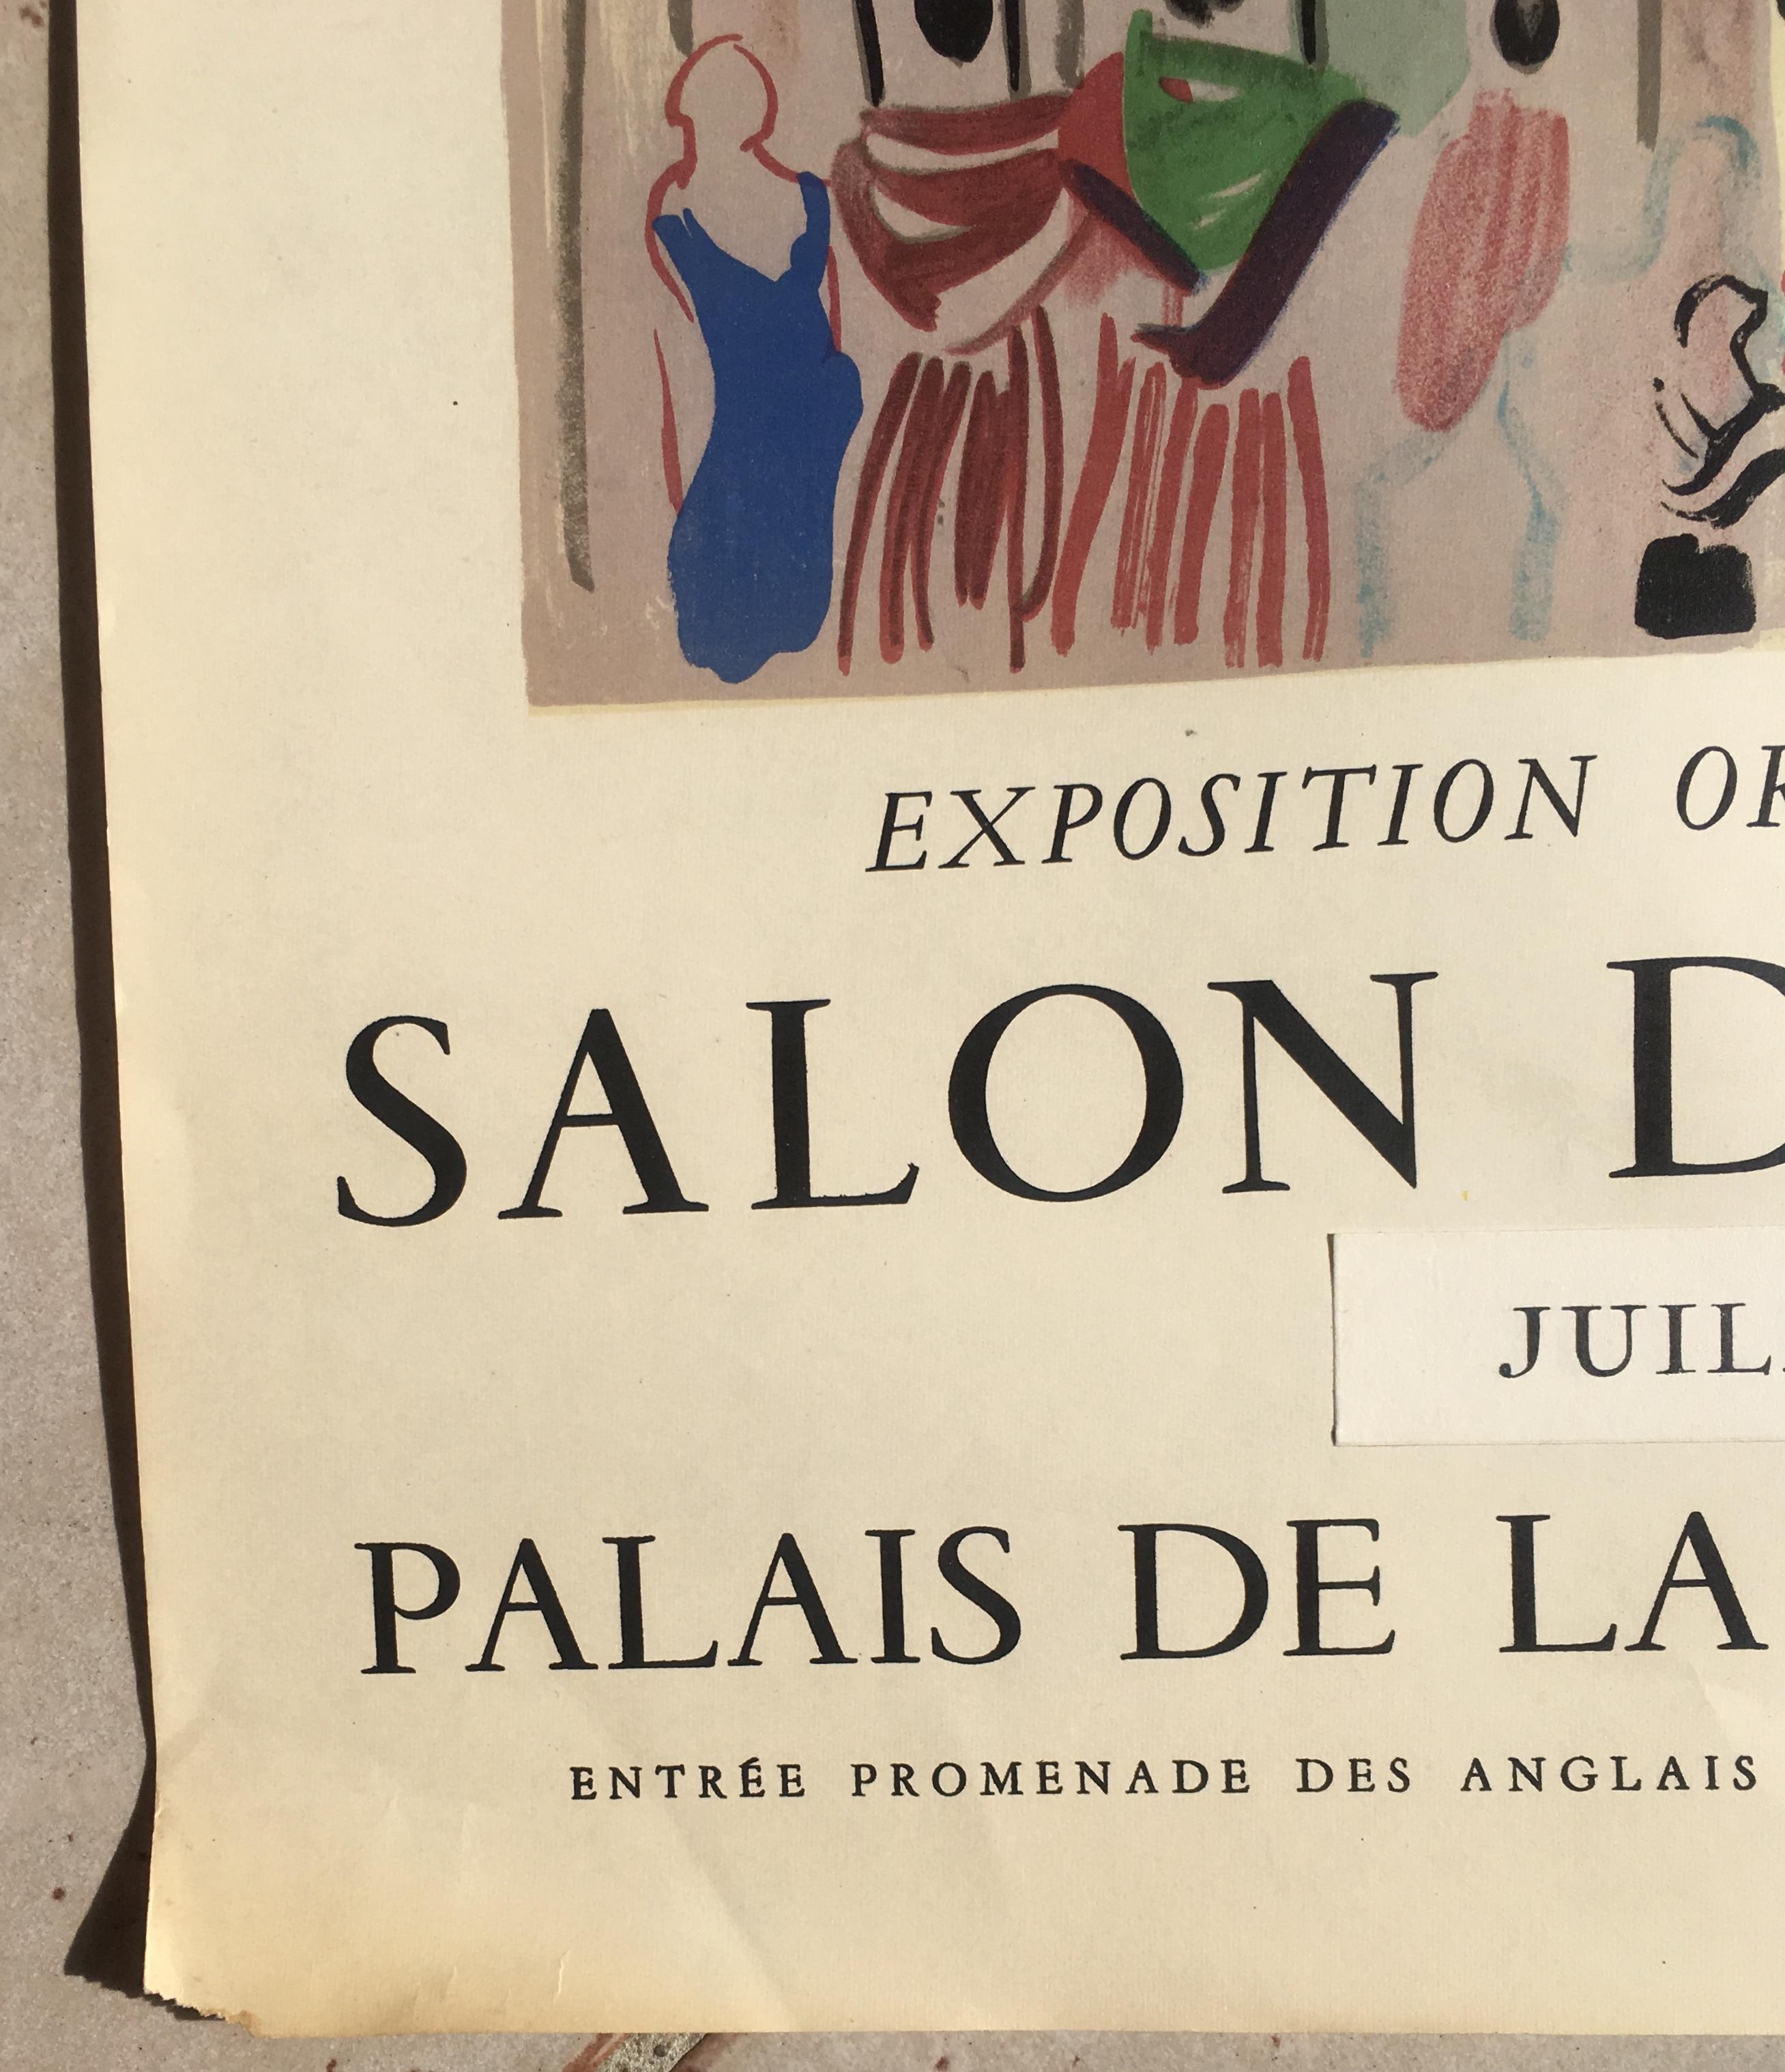 French Original Raoul Dufy Mourlot Art Poster, Extended Exhibition Date